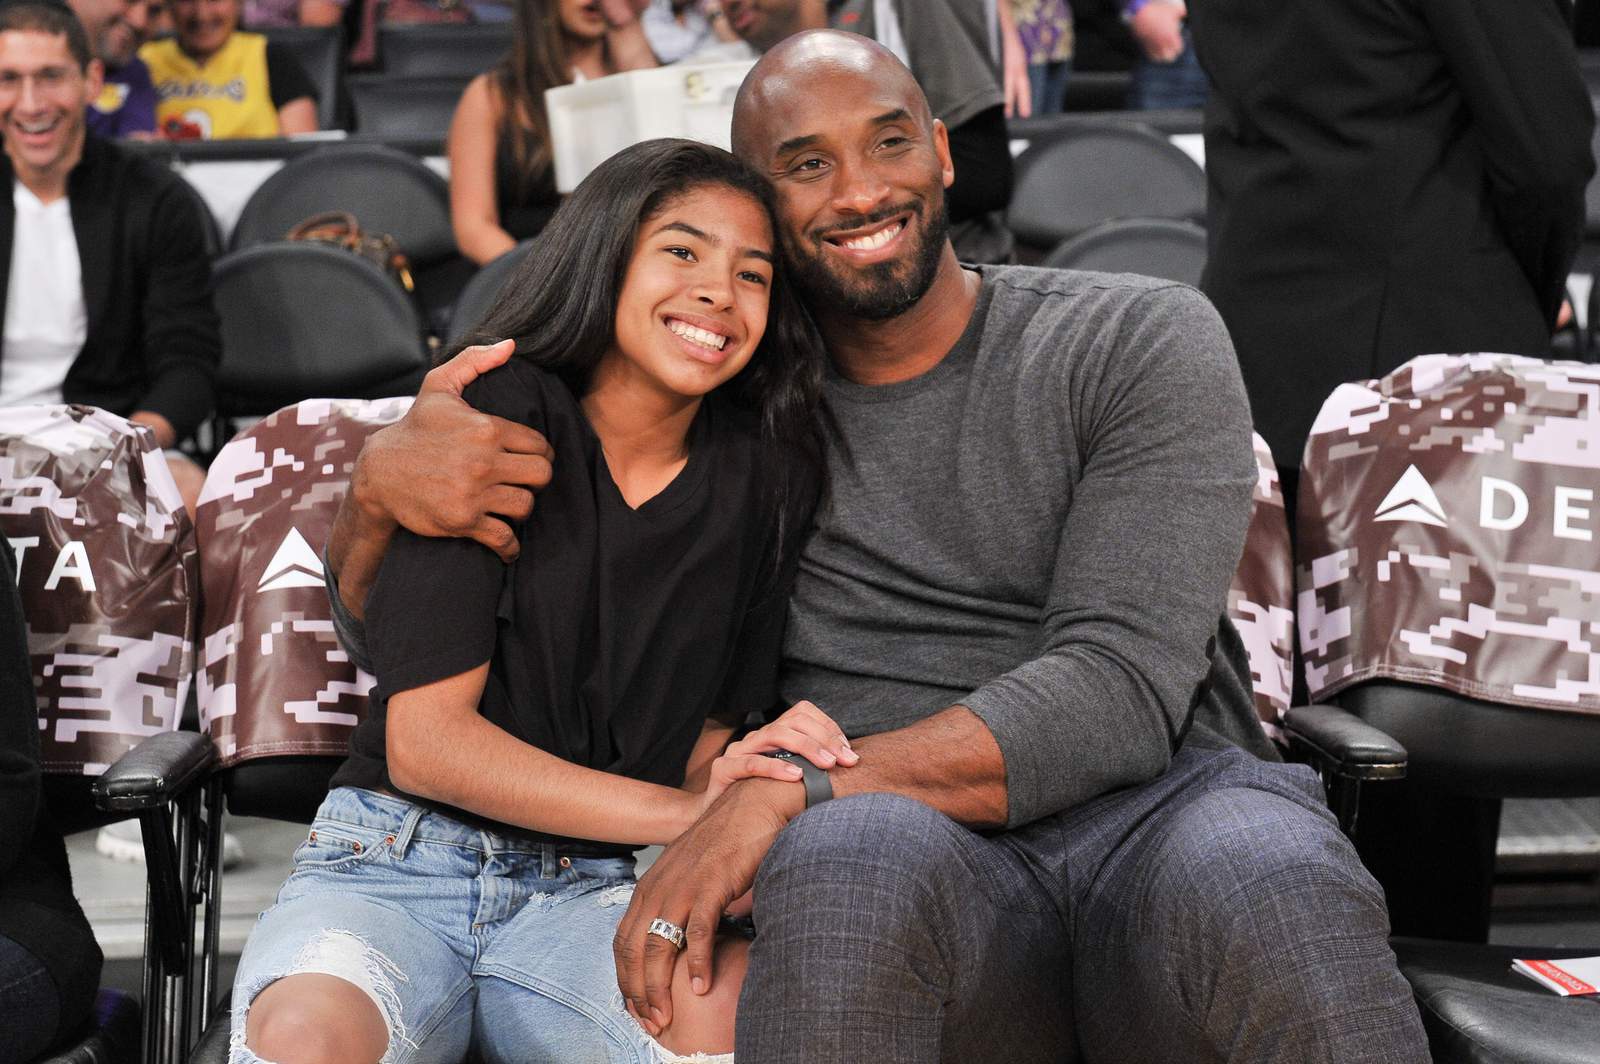 Kobe Bryant and his daughter Gianna Bryant attend a basketball game between the Los Angeles Lakers and the Atlanta Hawks at the Staples Center on Nov. 17, 2019.